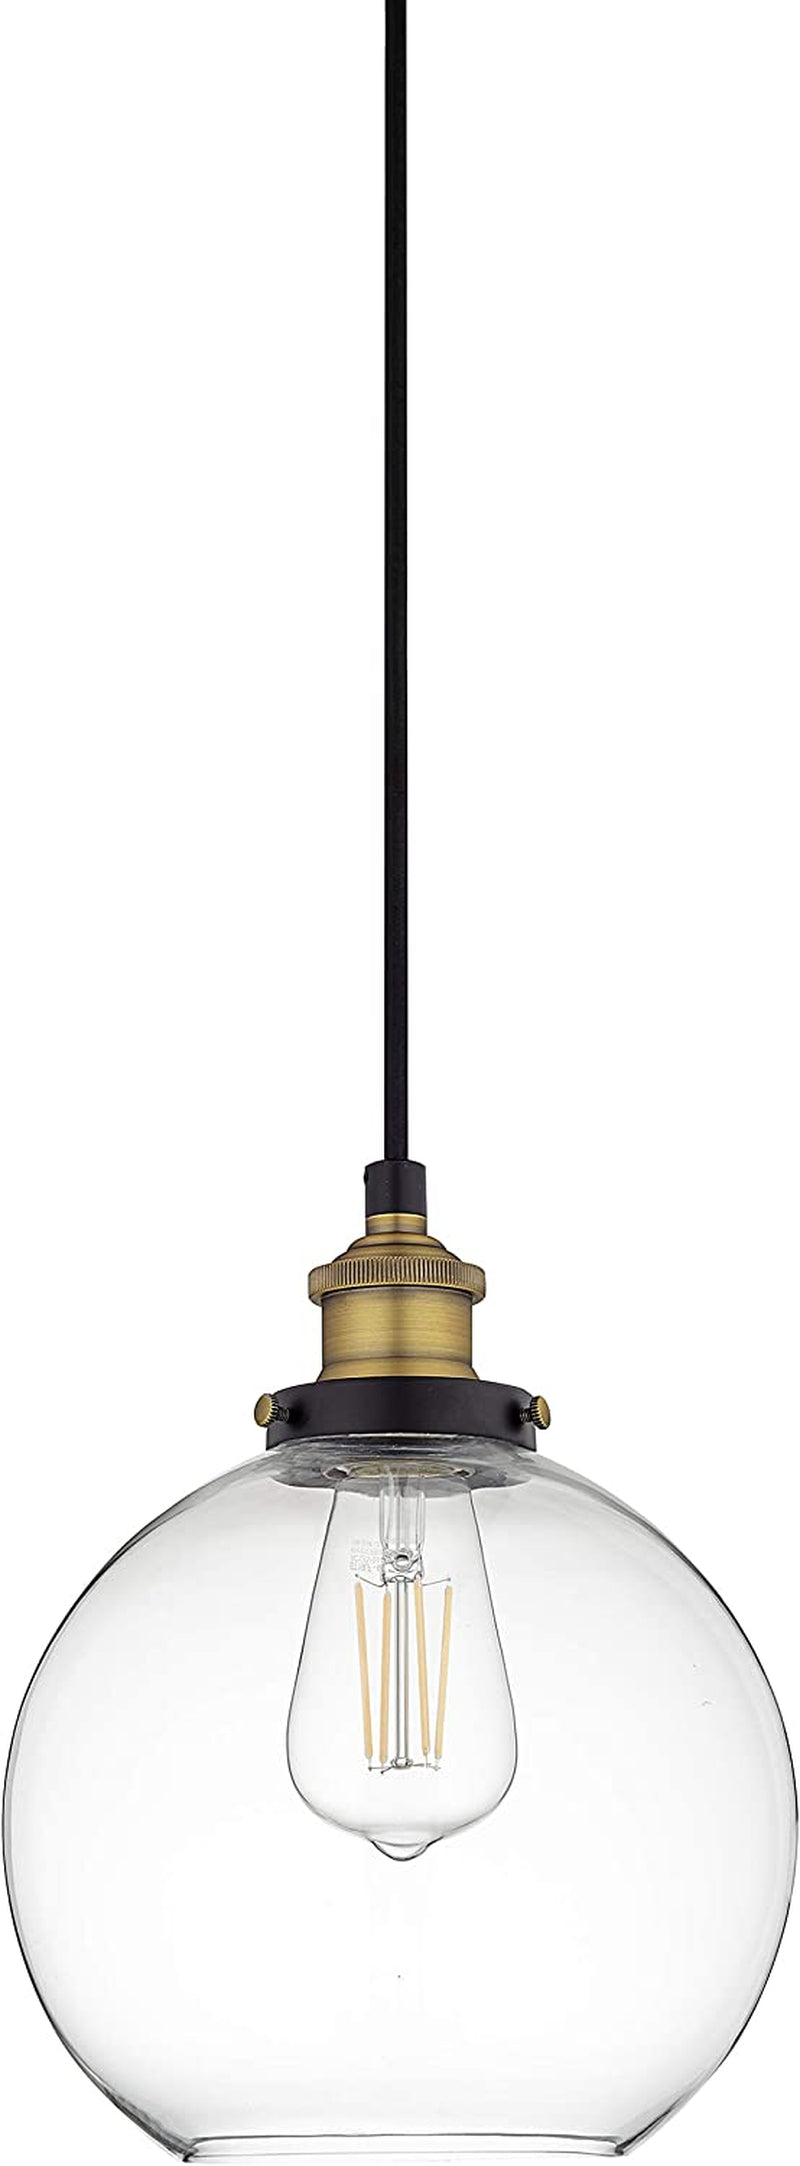 Linea Di Liara Primo Large Black and Gold Glass Globe Pendant Light Fixture Farmhouse Pendant Lighting for Kitchen Island Mid Century Modern Ceiling Light Clear Glass Shade, UL Listed Home & Garden > Lighting > Lighting Fixtures Linea di Liara Black/Brass with LED Bulb 